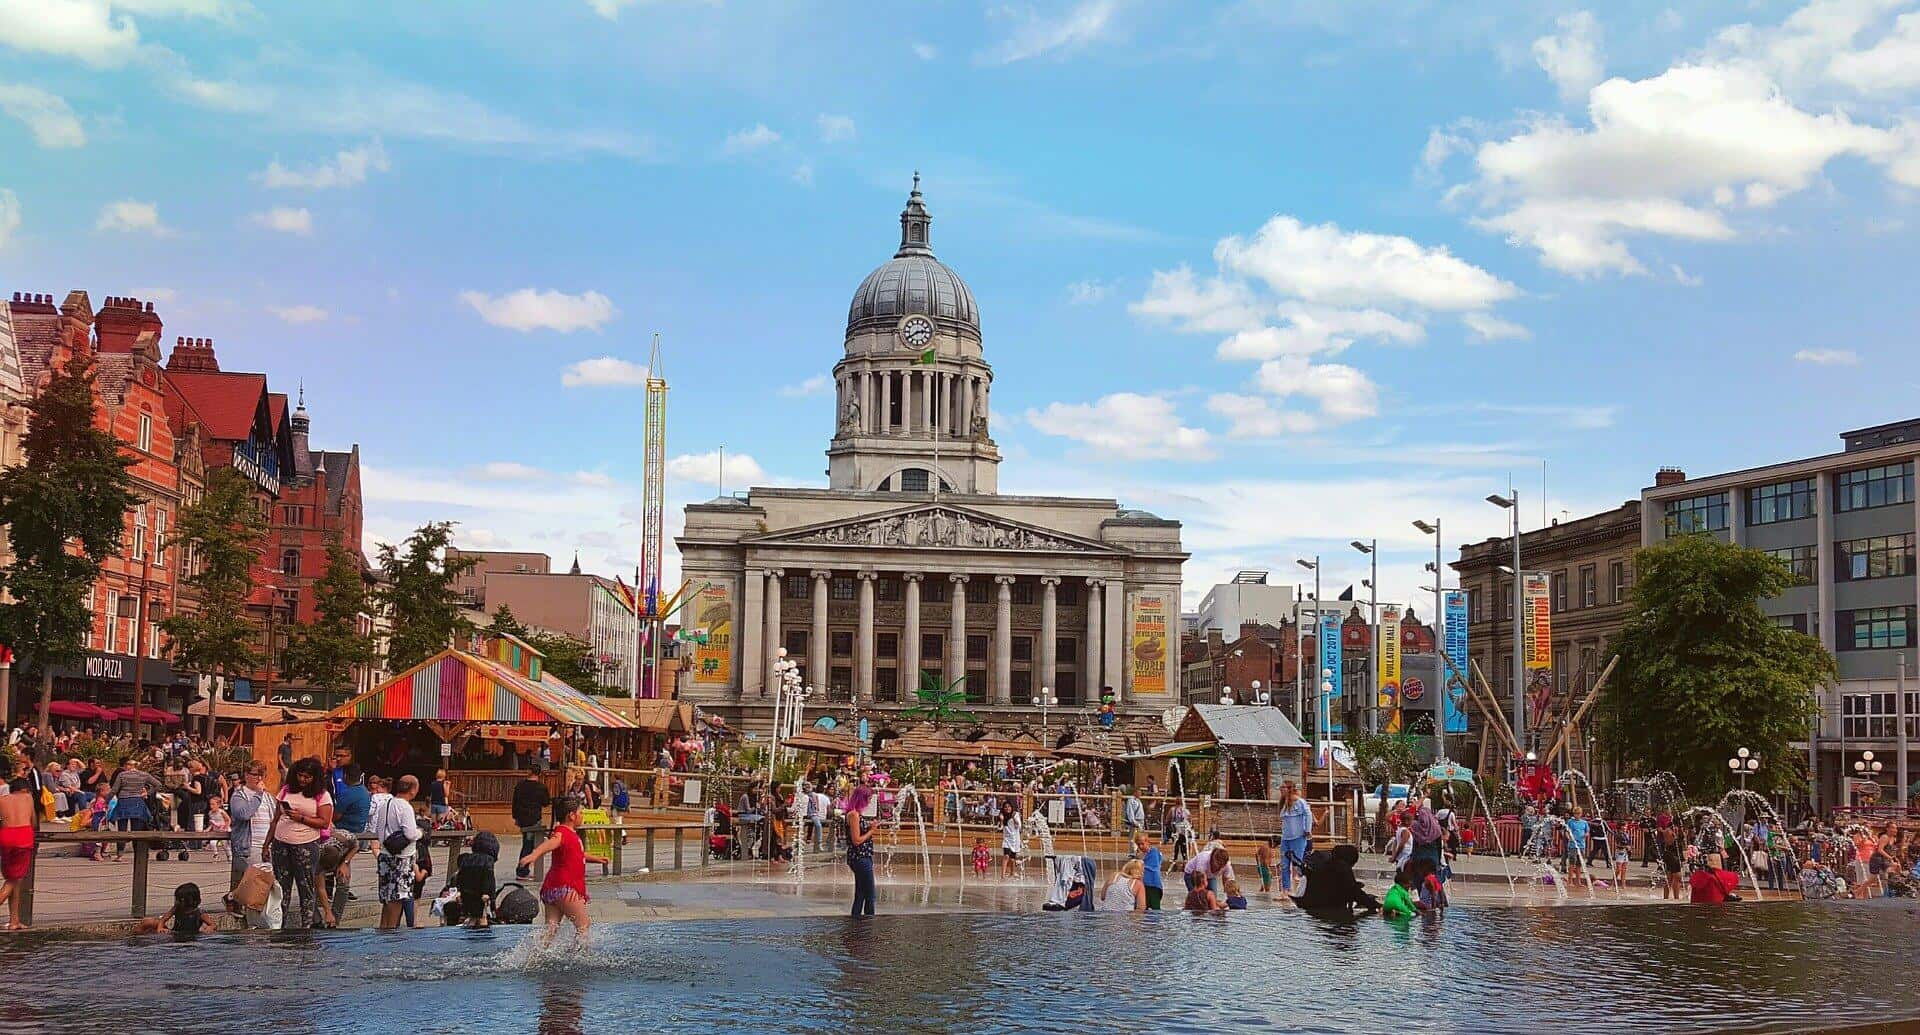 The center of Nottingham is market by the Town Hall and the market around it.